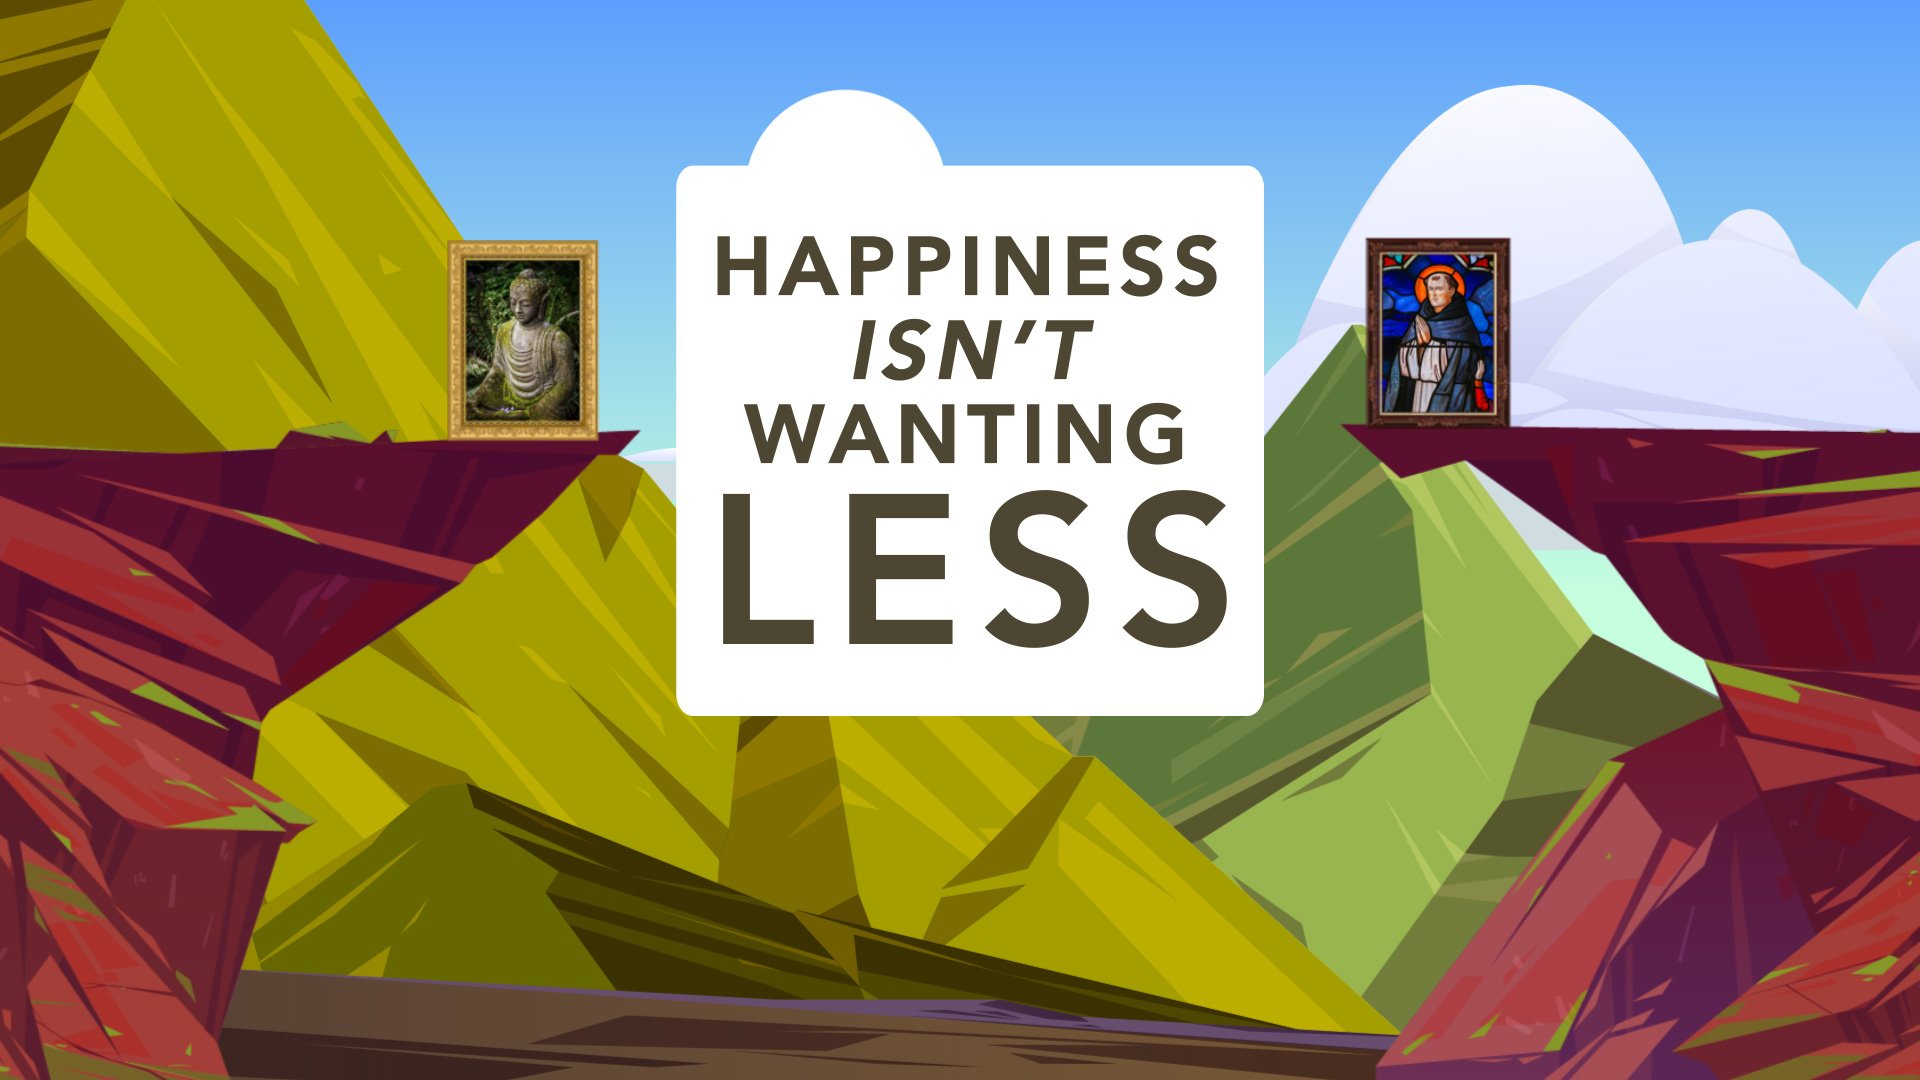 Happiness Isn’t Wanting Less